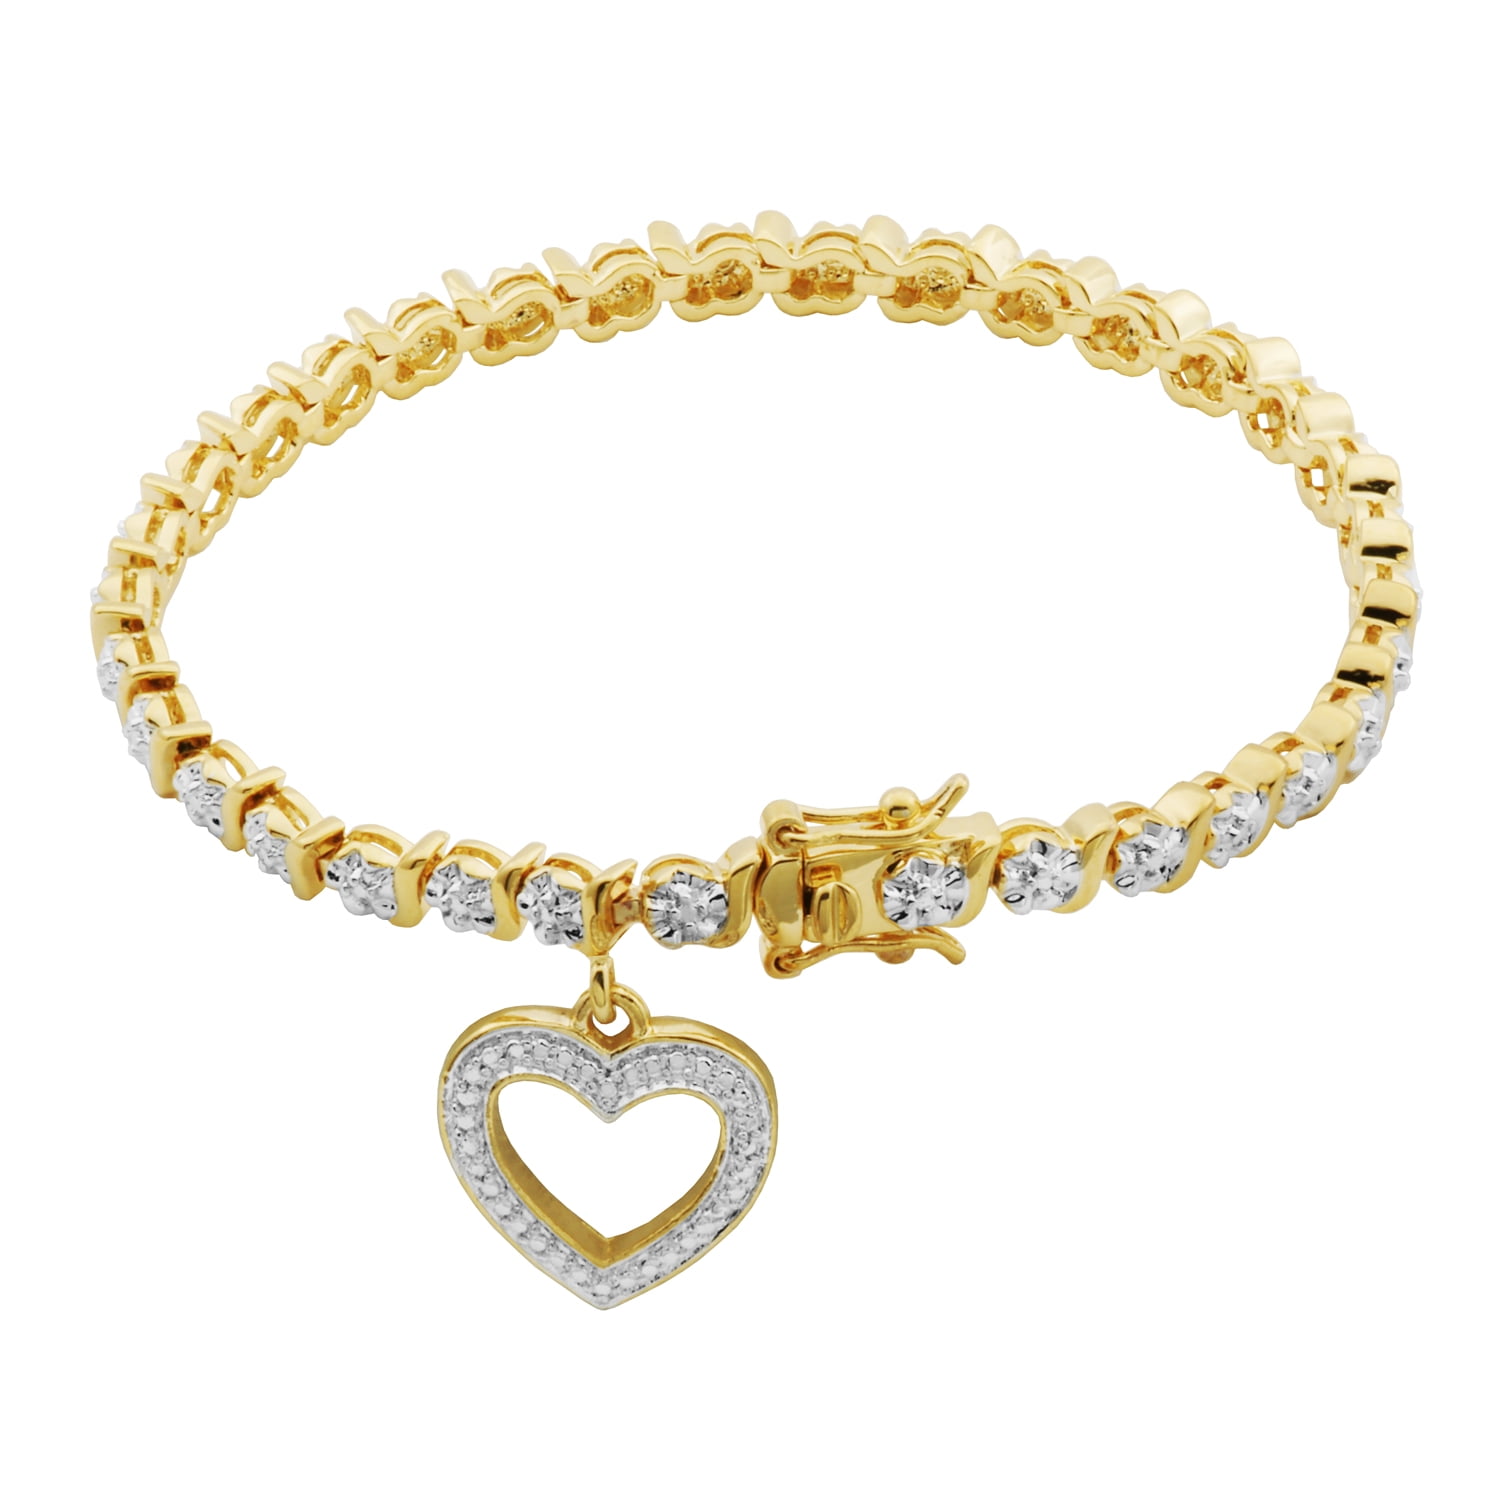 Details about   7 in Gold over 925 Sterling Silver Hearts Tennis Bracelet 